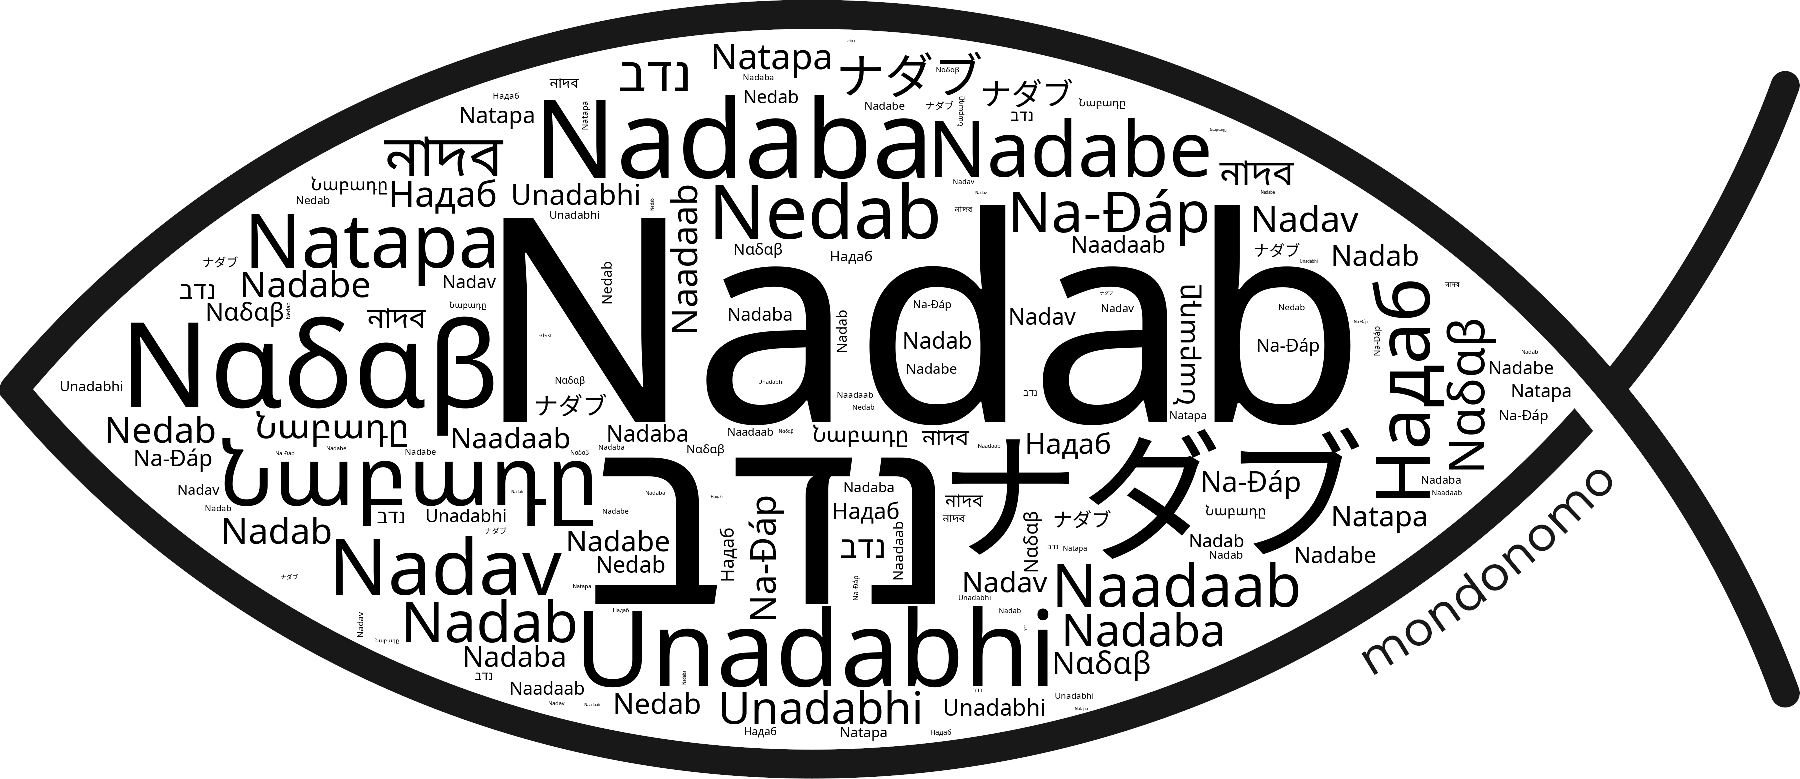 Name Nadab in the world's Bibles